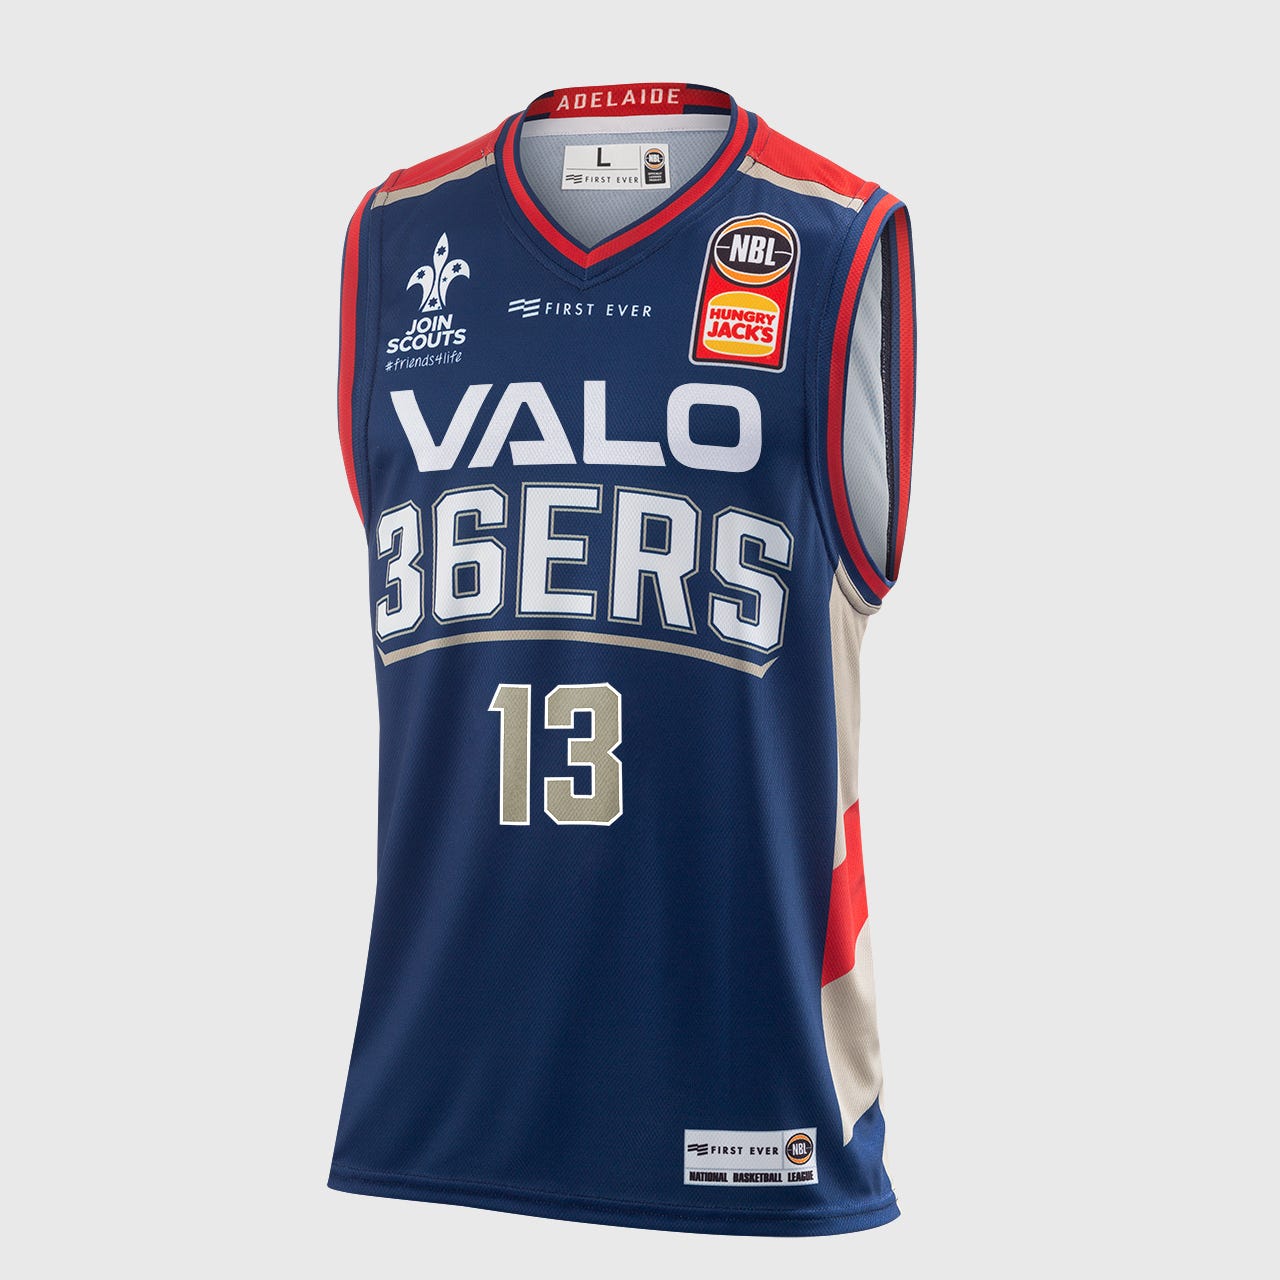 adelaide 36ers jersey